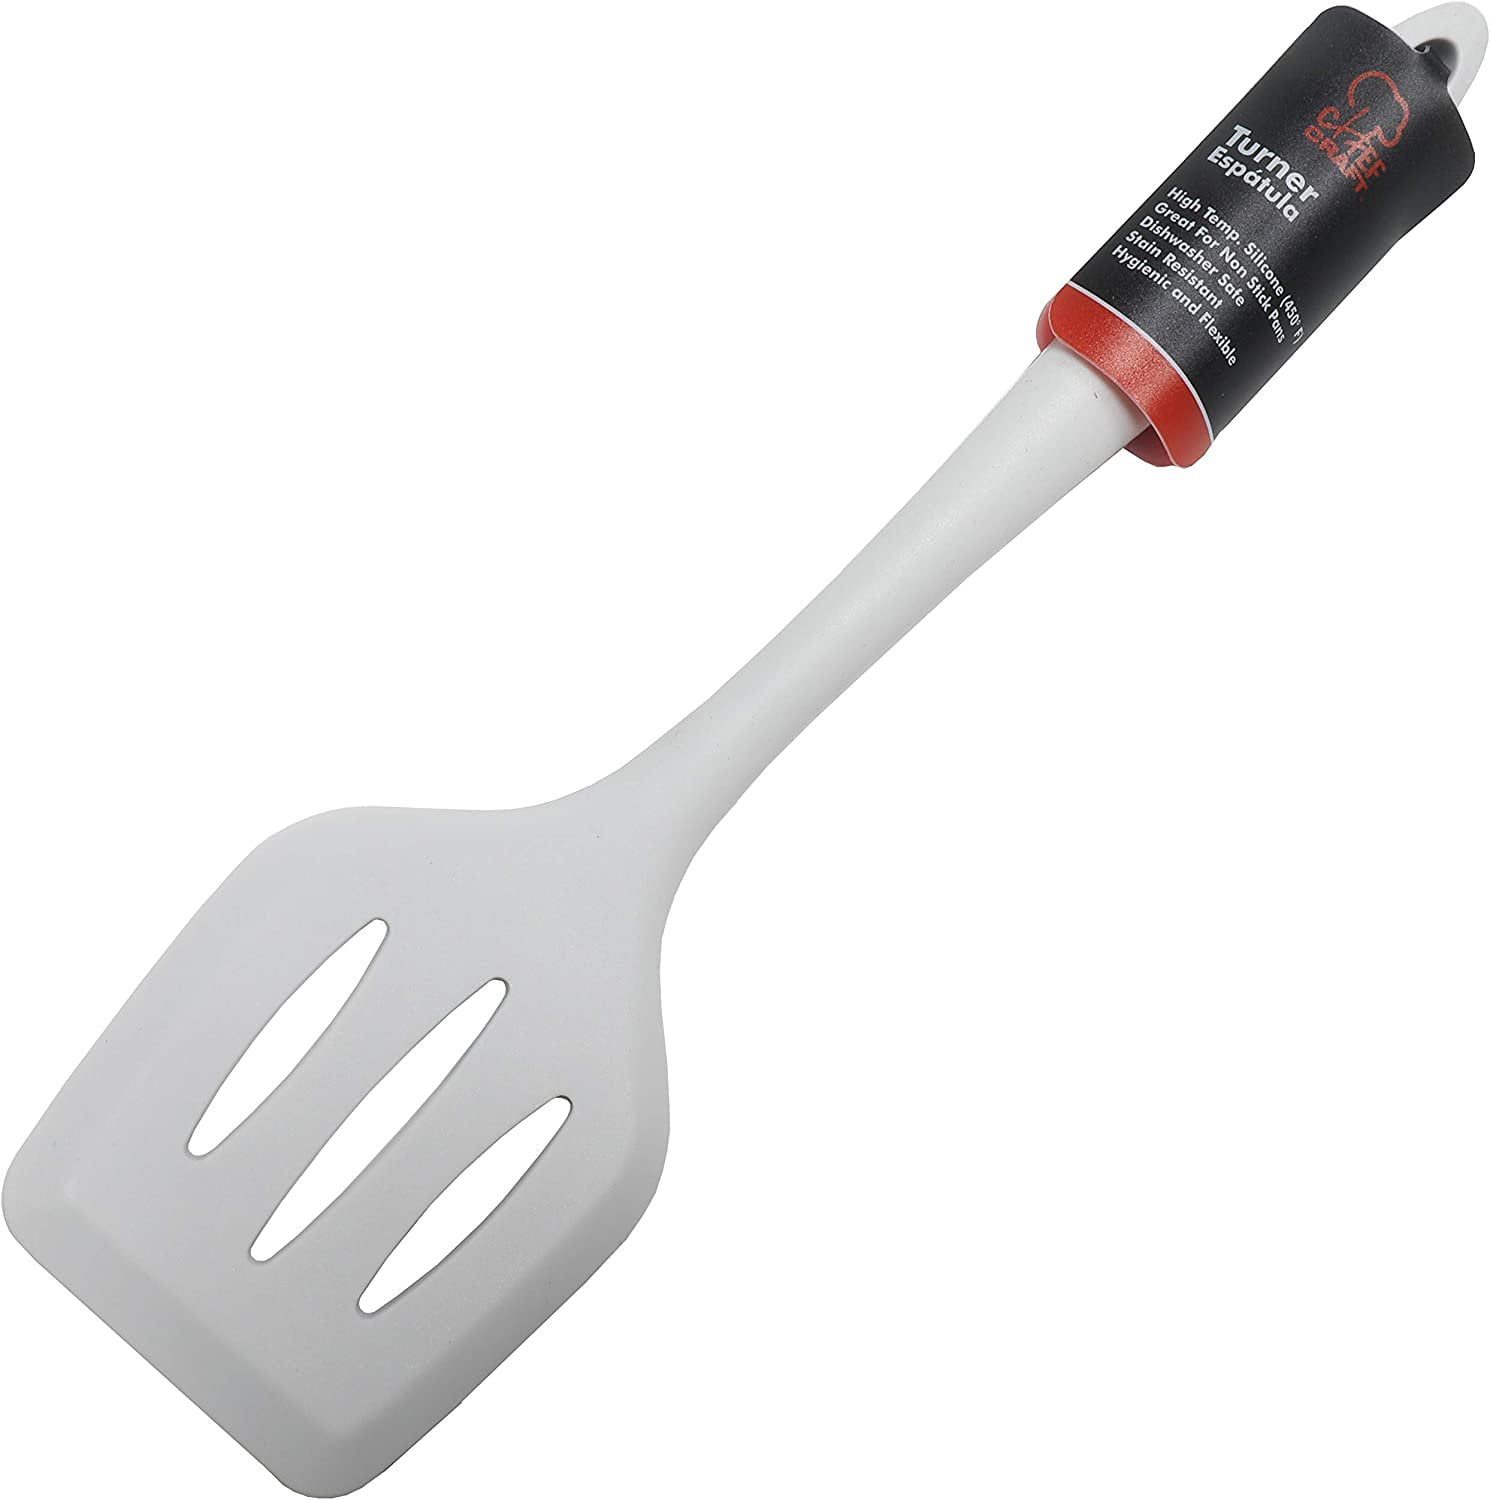 Ateco 1352 11 Stainless Steel Flexible Solid Spatula / Turner